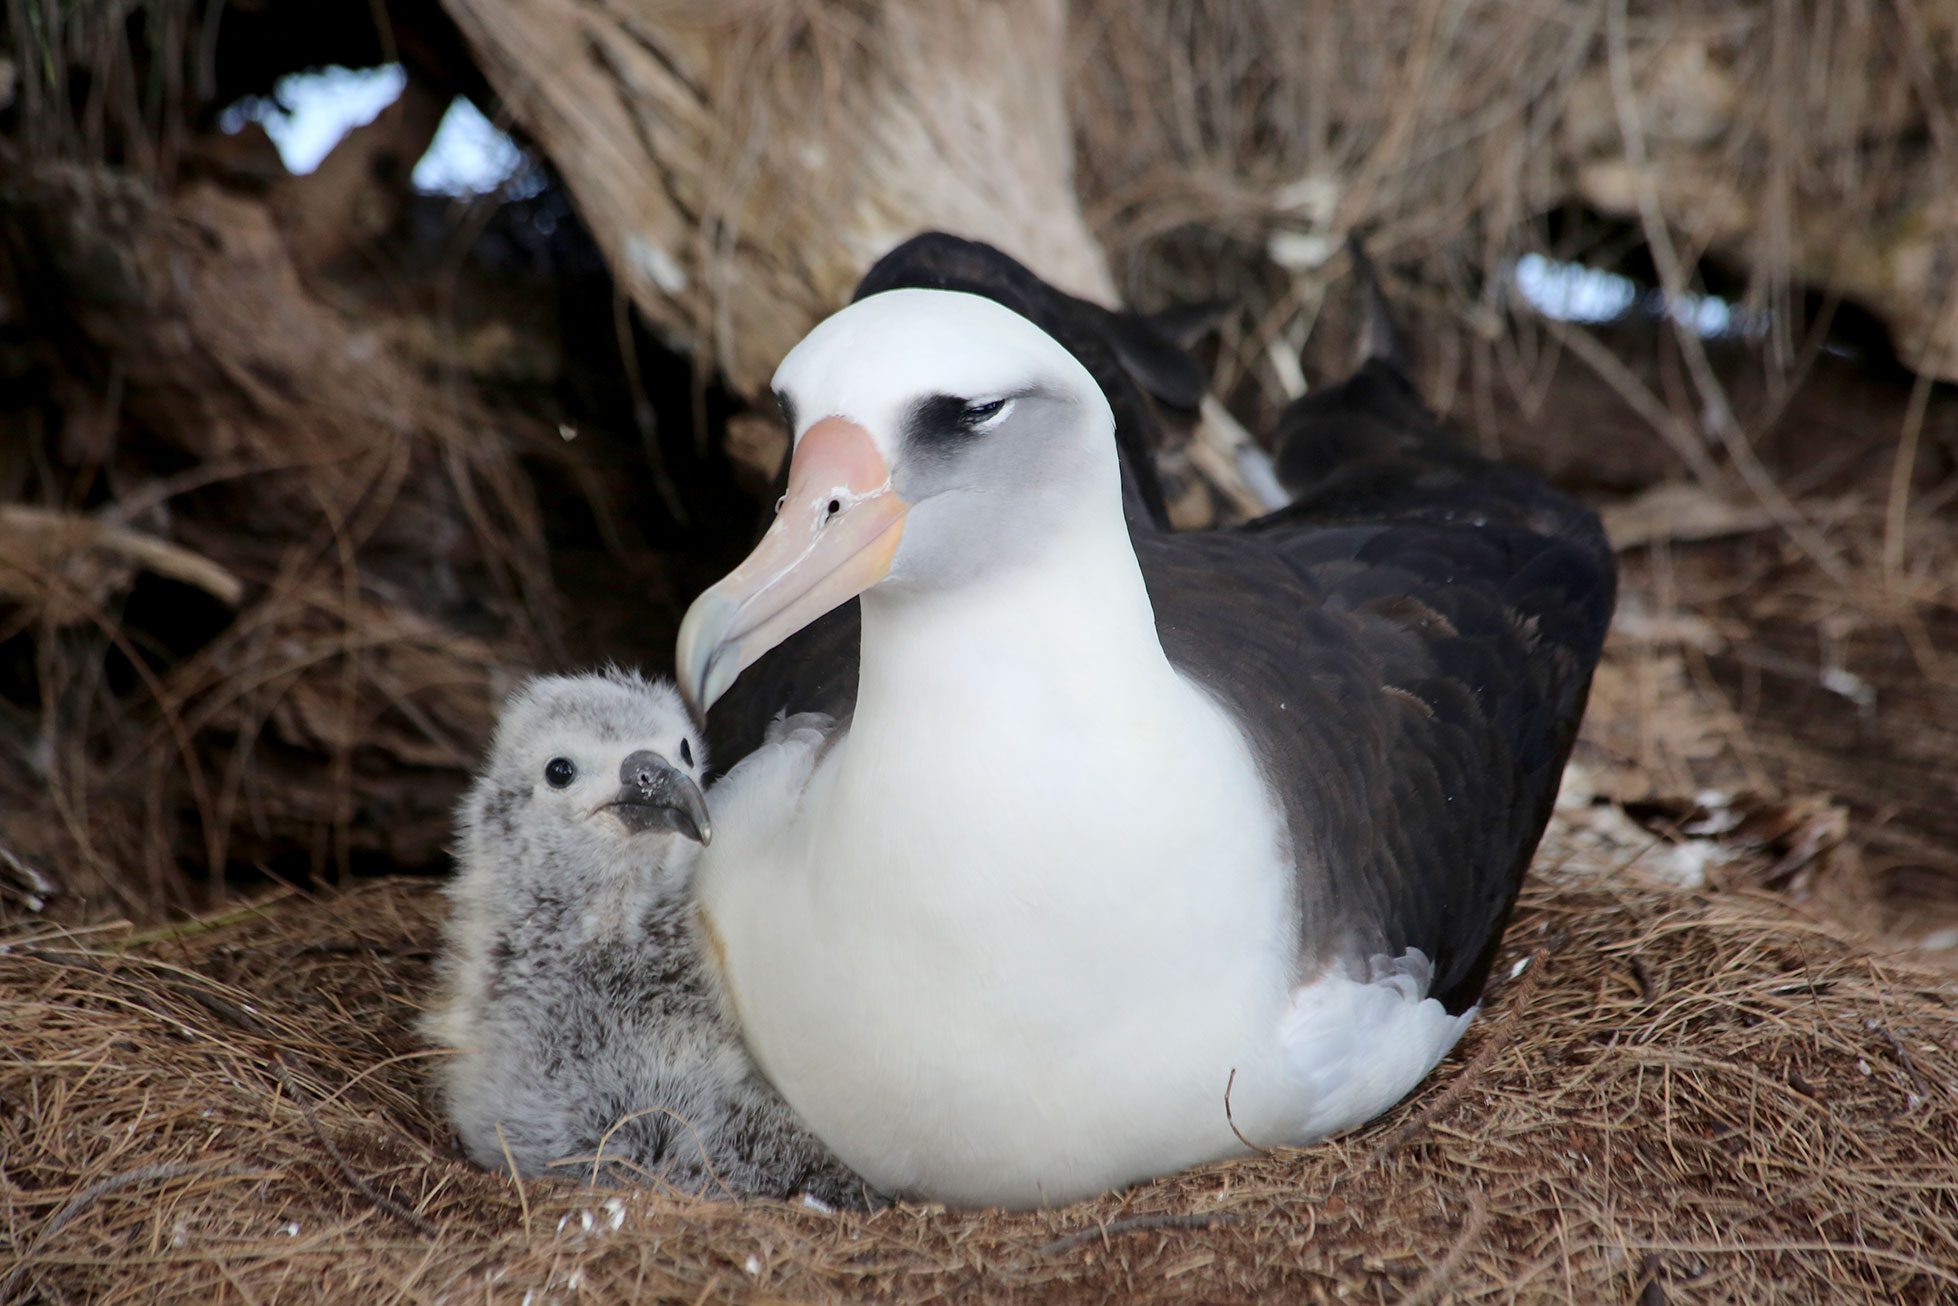 Laysan Albatross parent and chick by Hob Osterlund